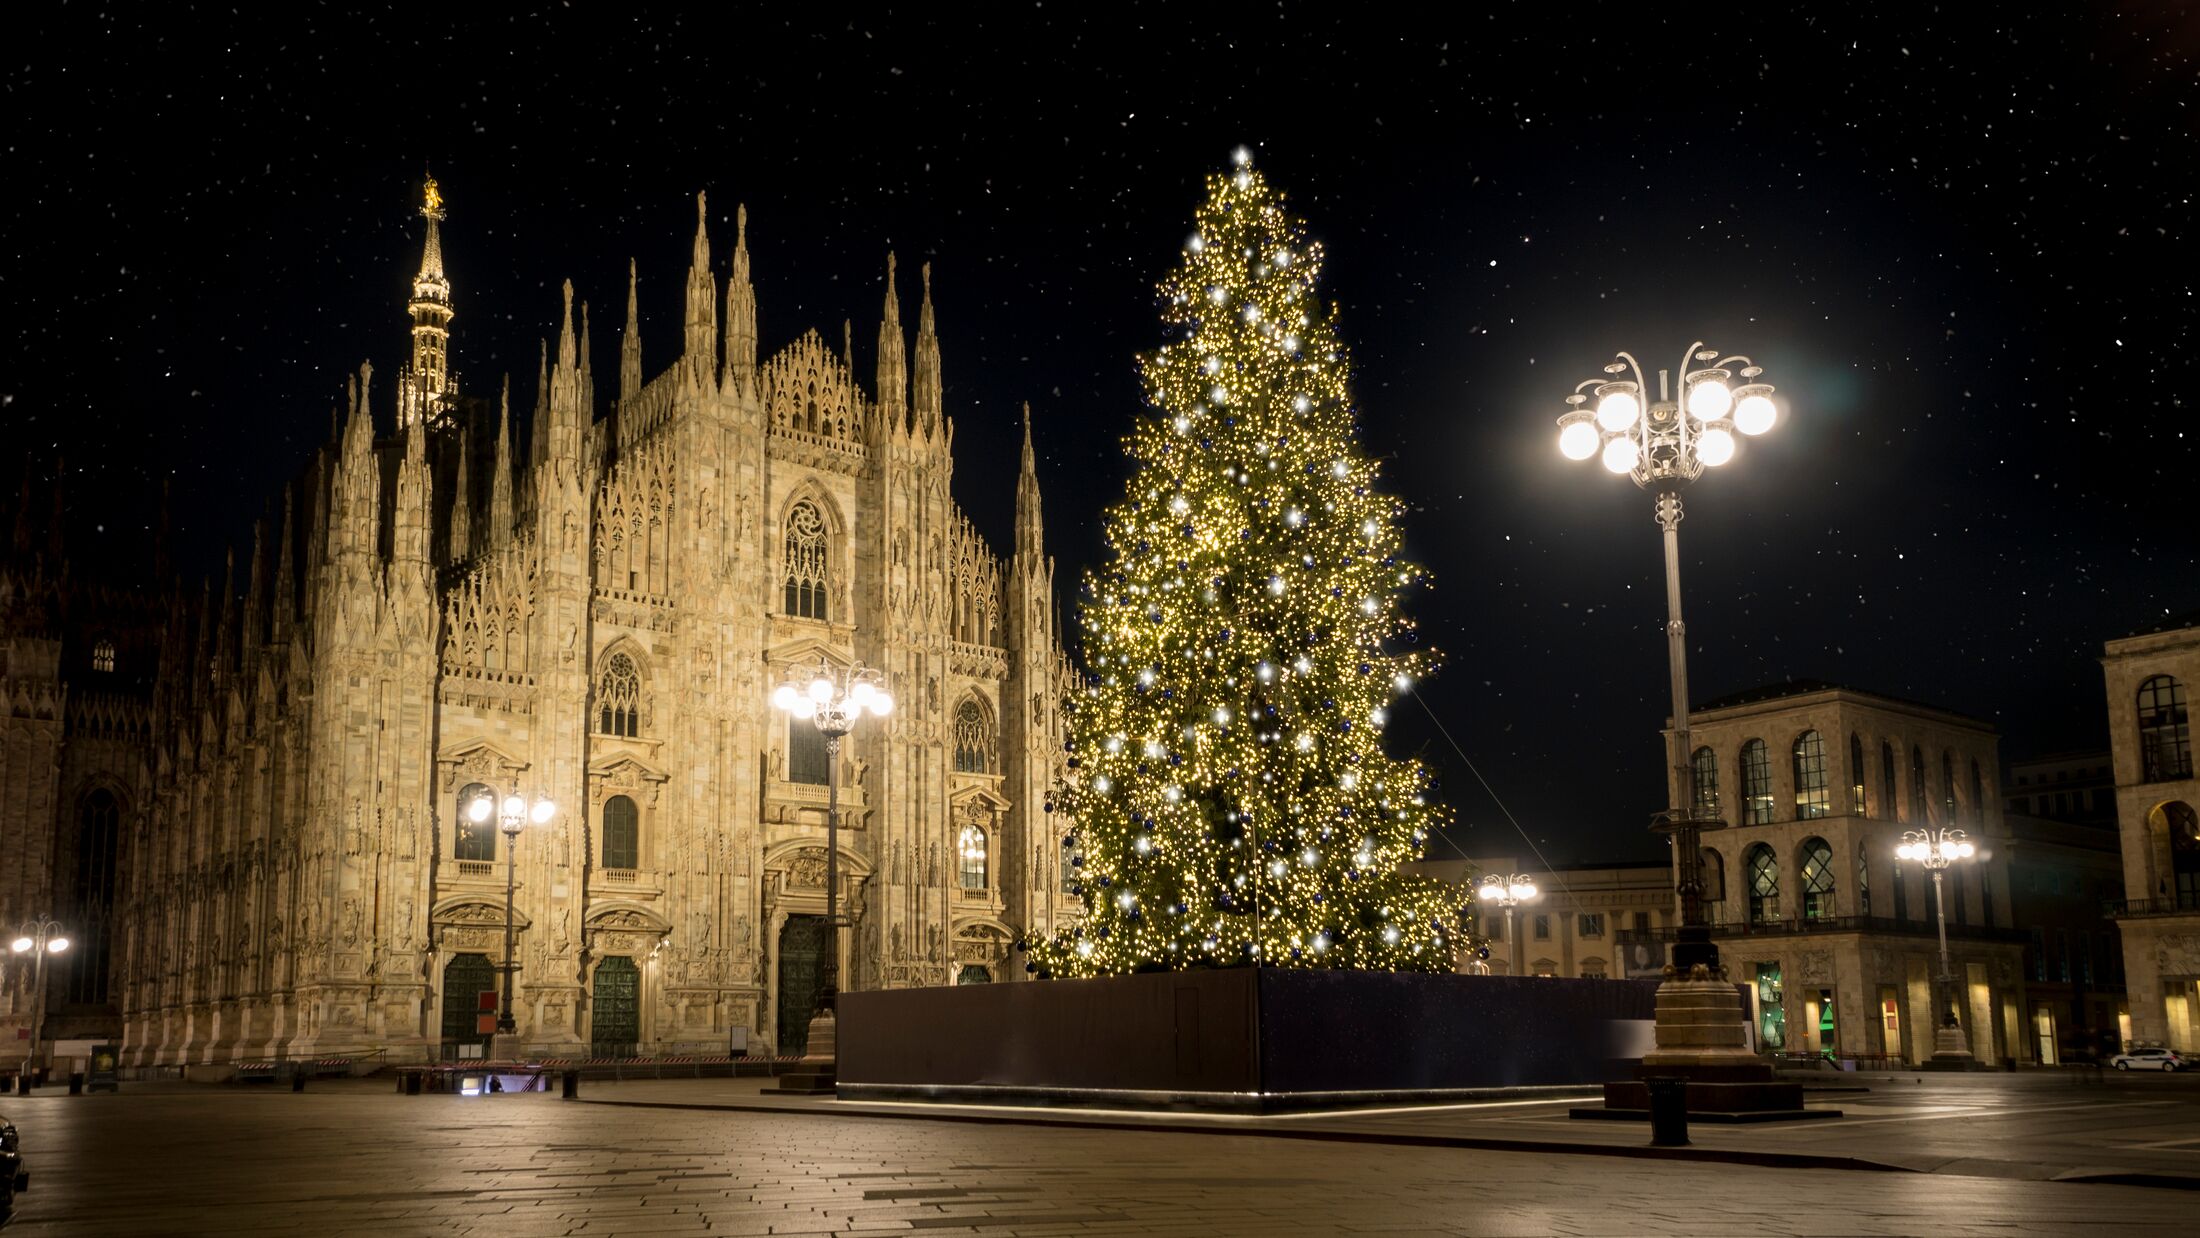 Milan (Italy) in winter: Christmas tree in front of Milan cathedral, Duomo square in december, night view. Starry sky.